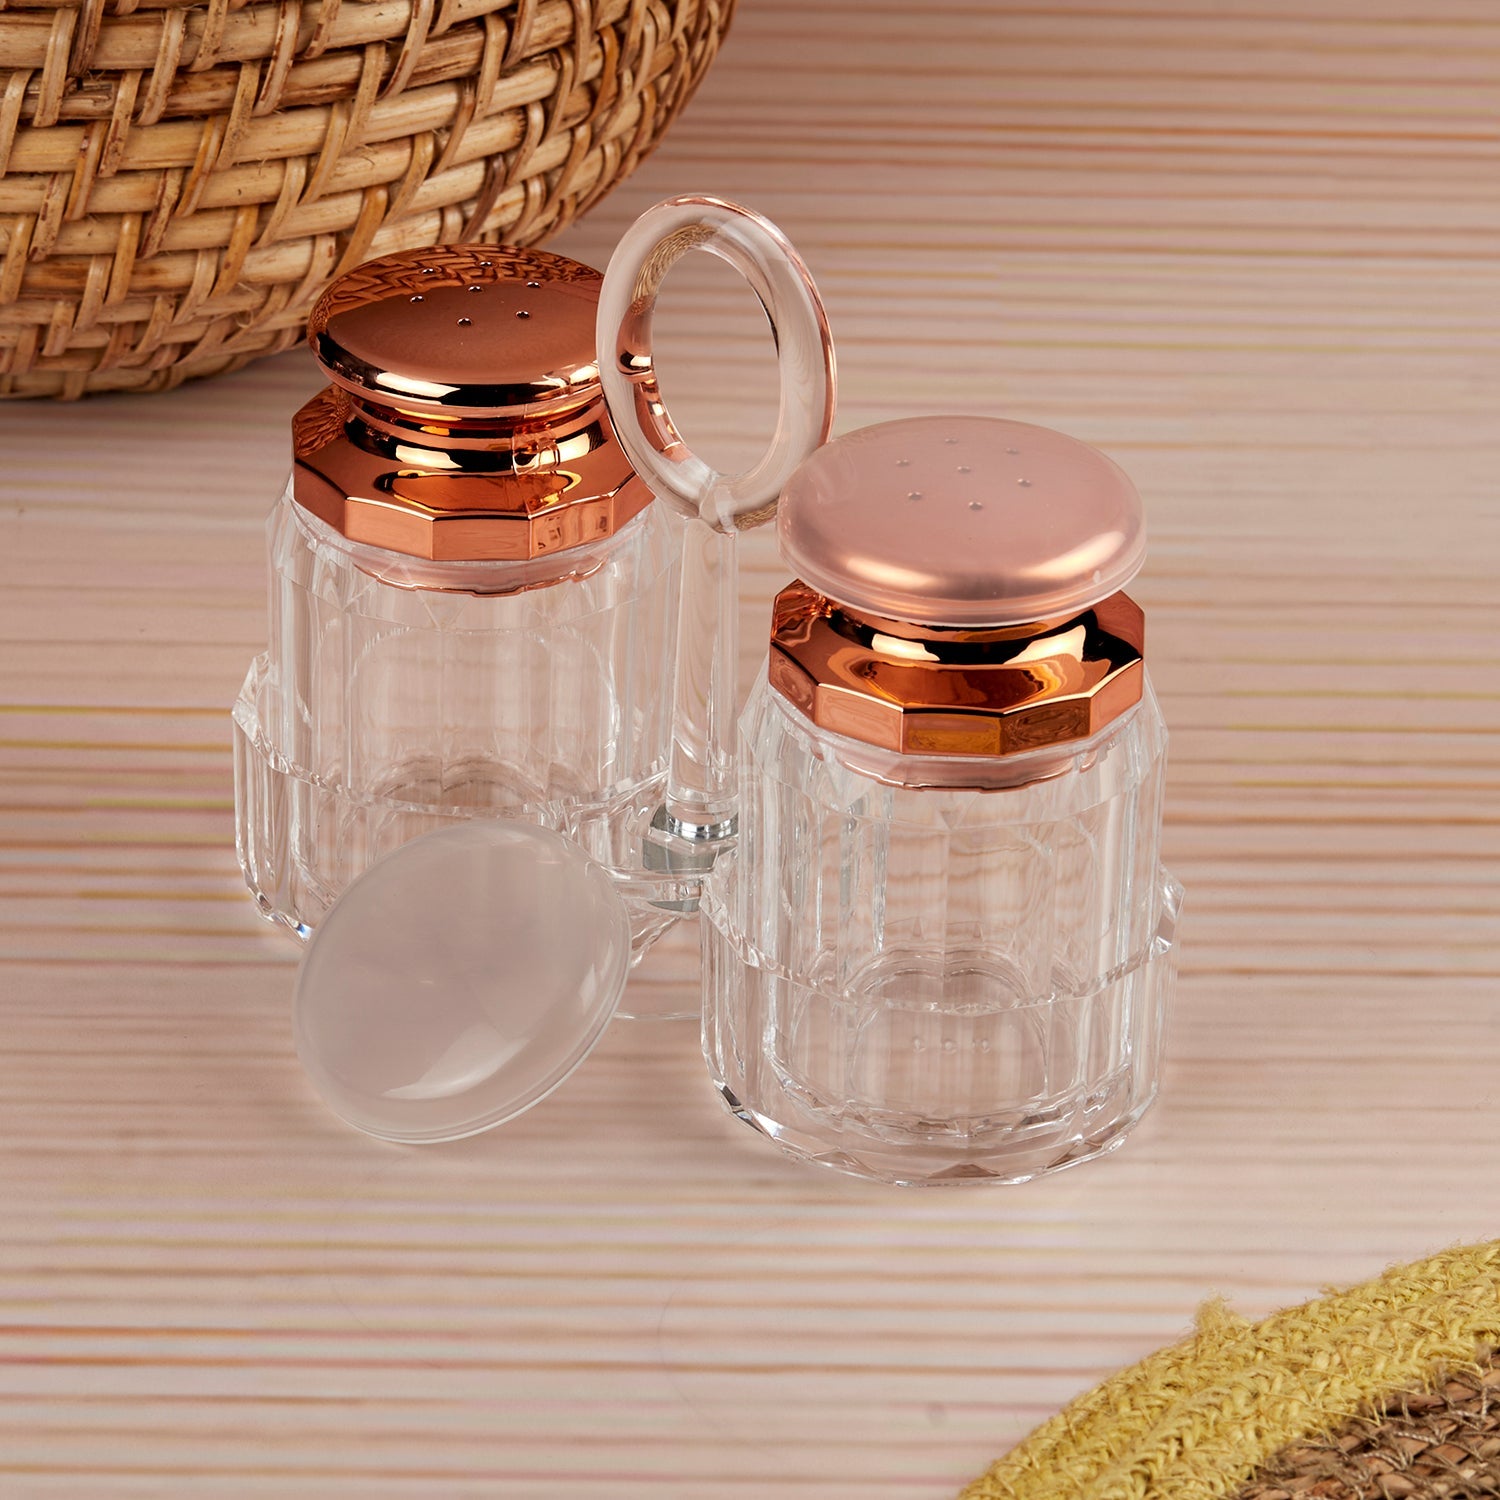 Acrylic Salt and Pepper Shakers Set with tray for Dining Table (10708)